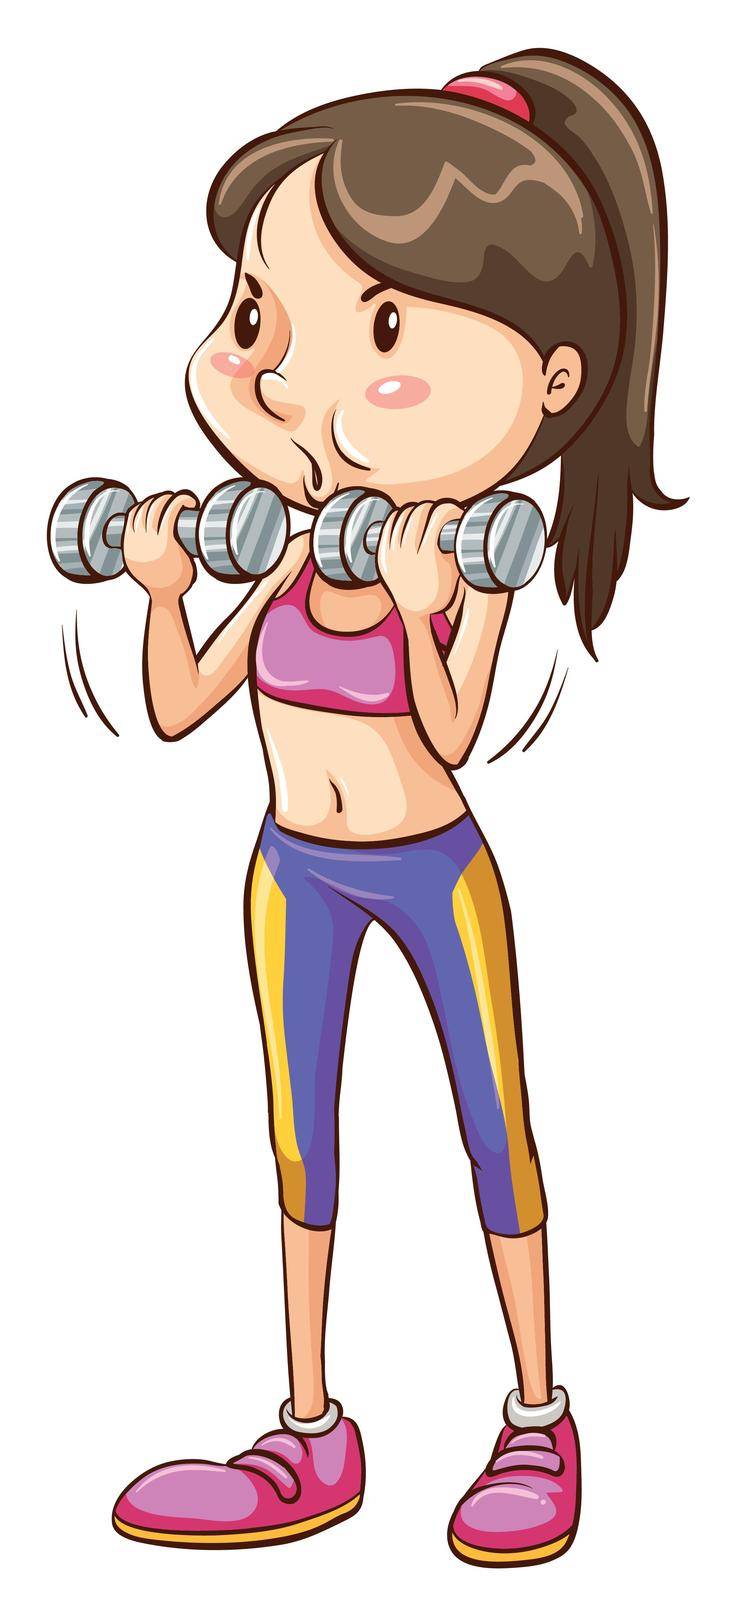 Illustration of a simple coloured sketch of a girl exercising on a white background